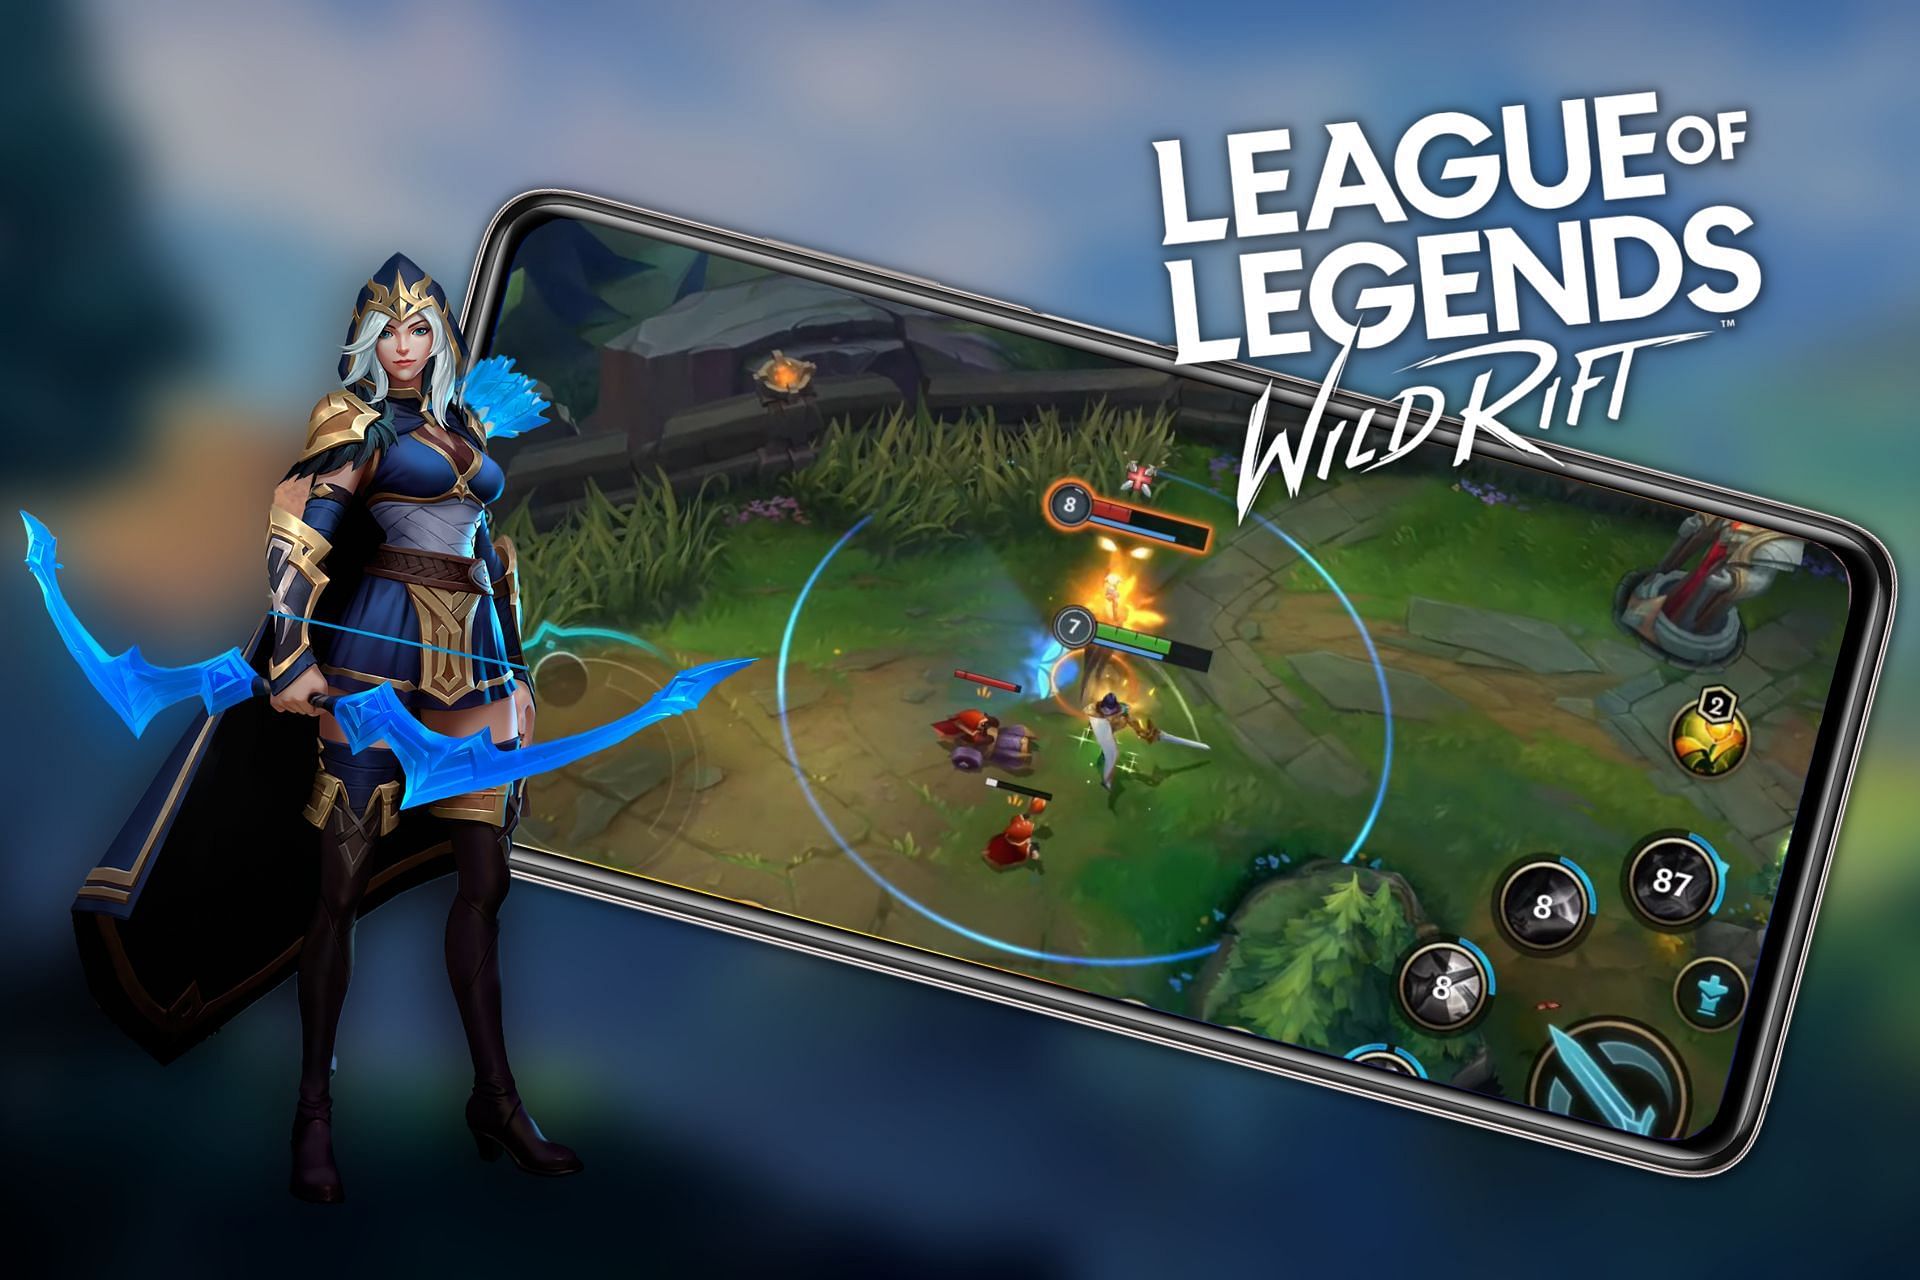 There's a little something - League of Legends: Wild Rift